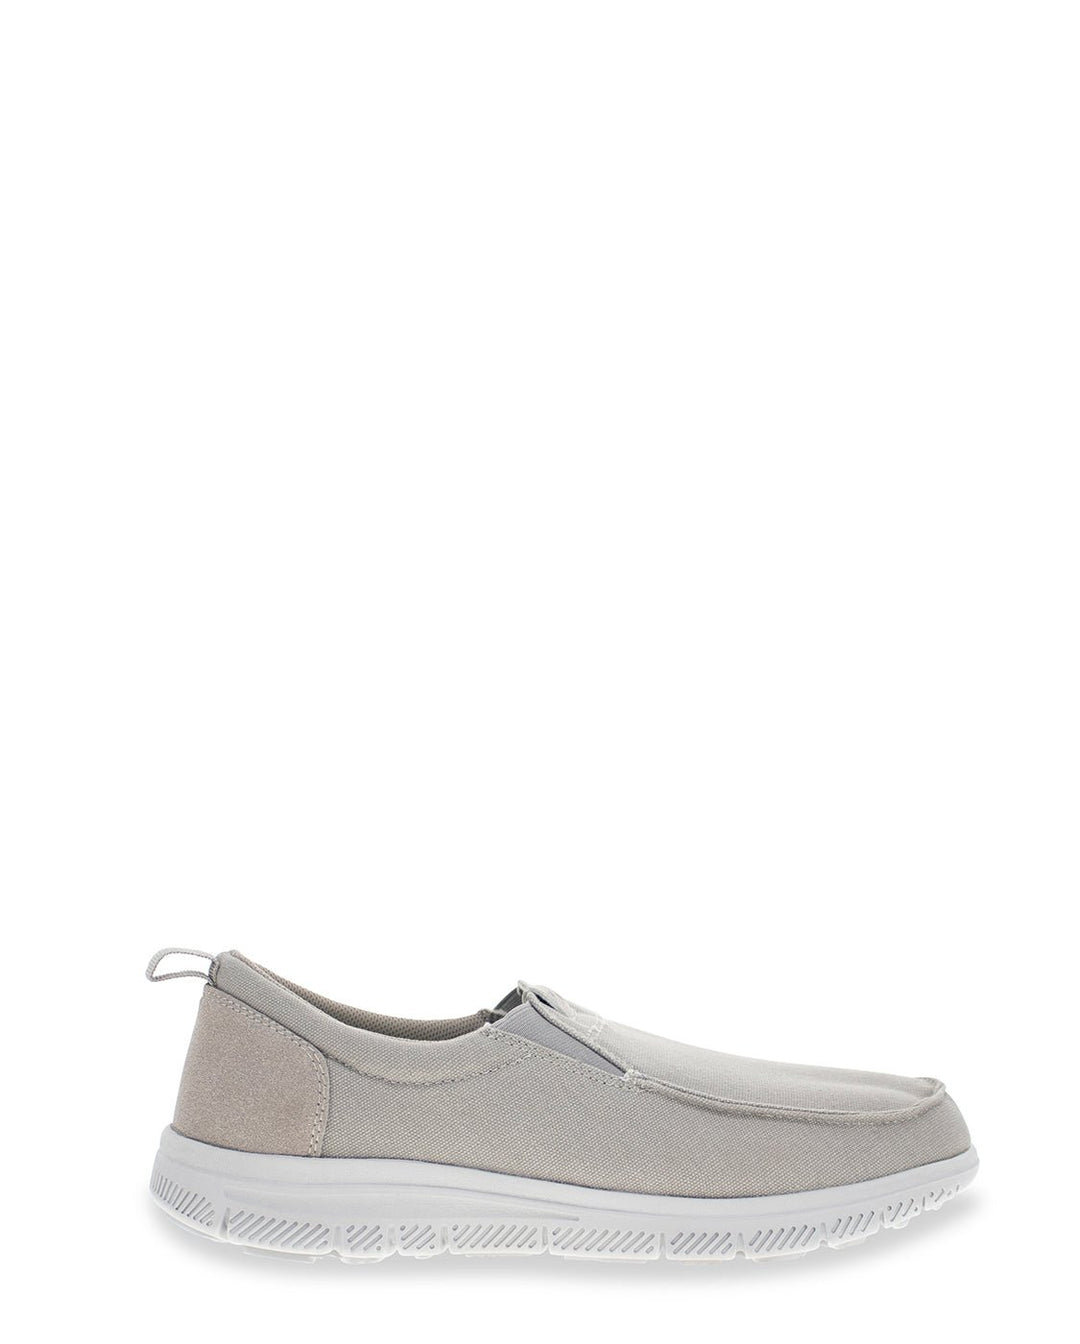  Paredes Men's bass and Slip-on, Gray, men10 d(m) us=44eu :  Clothing, Shoes & Jewelry